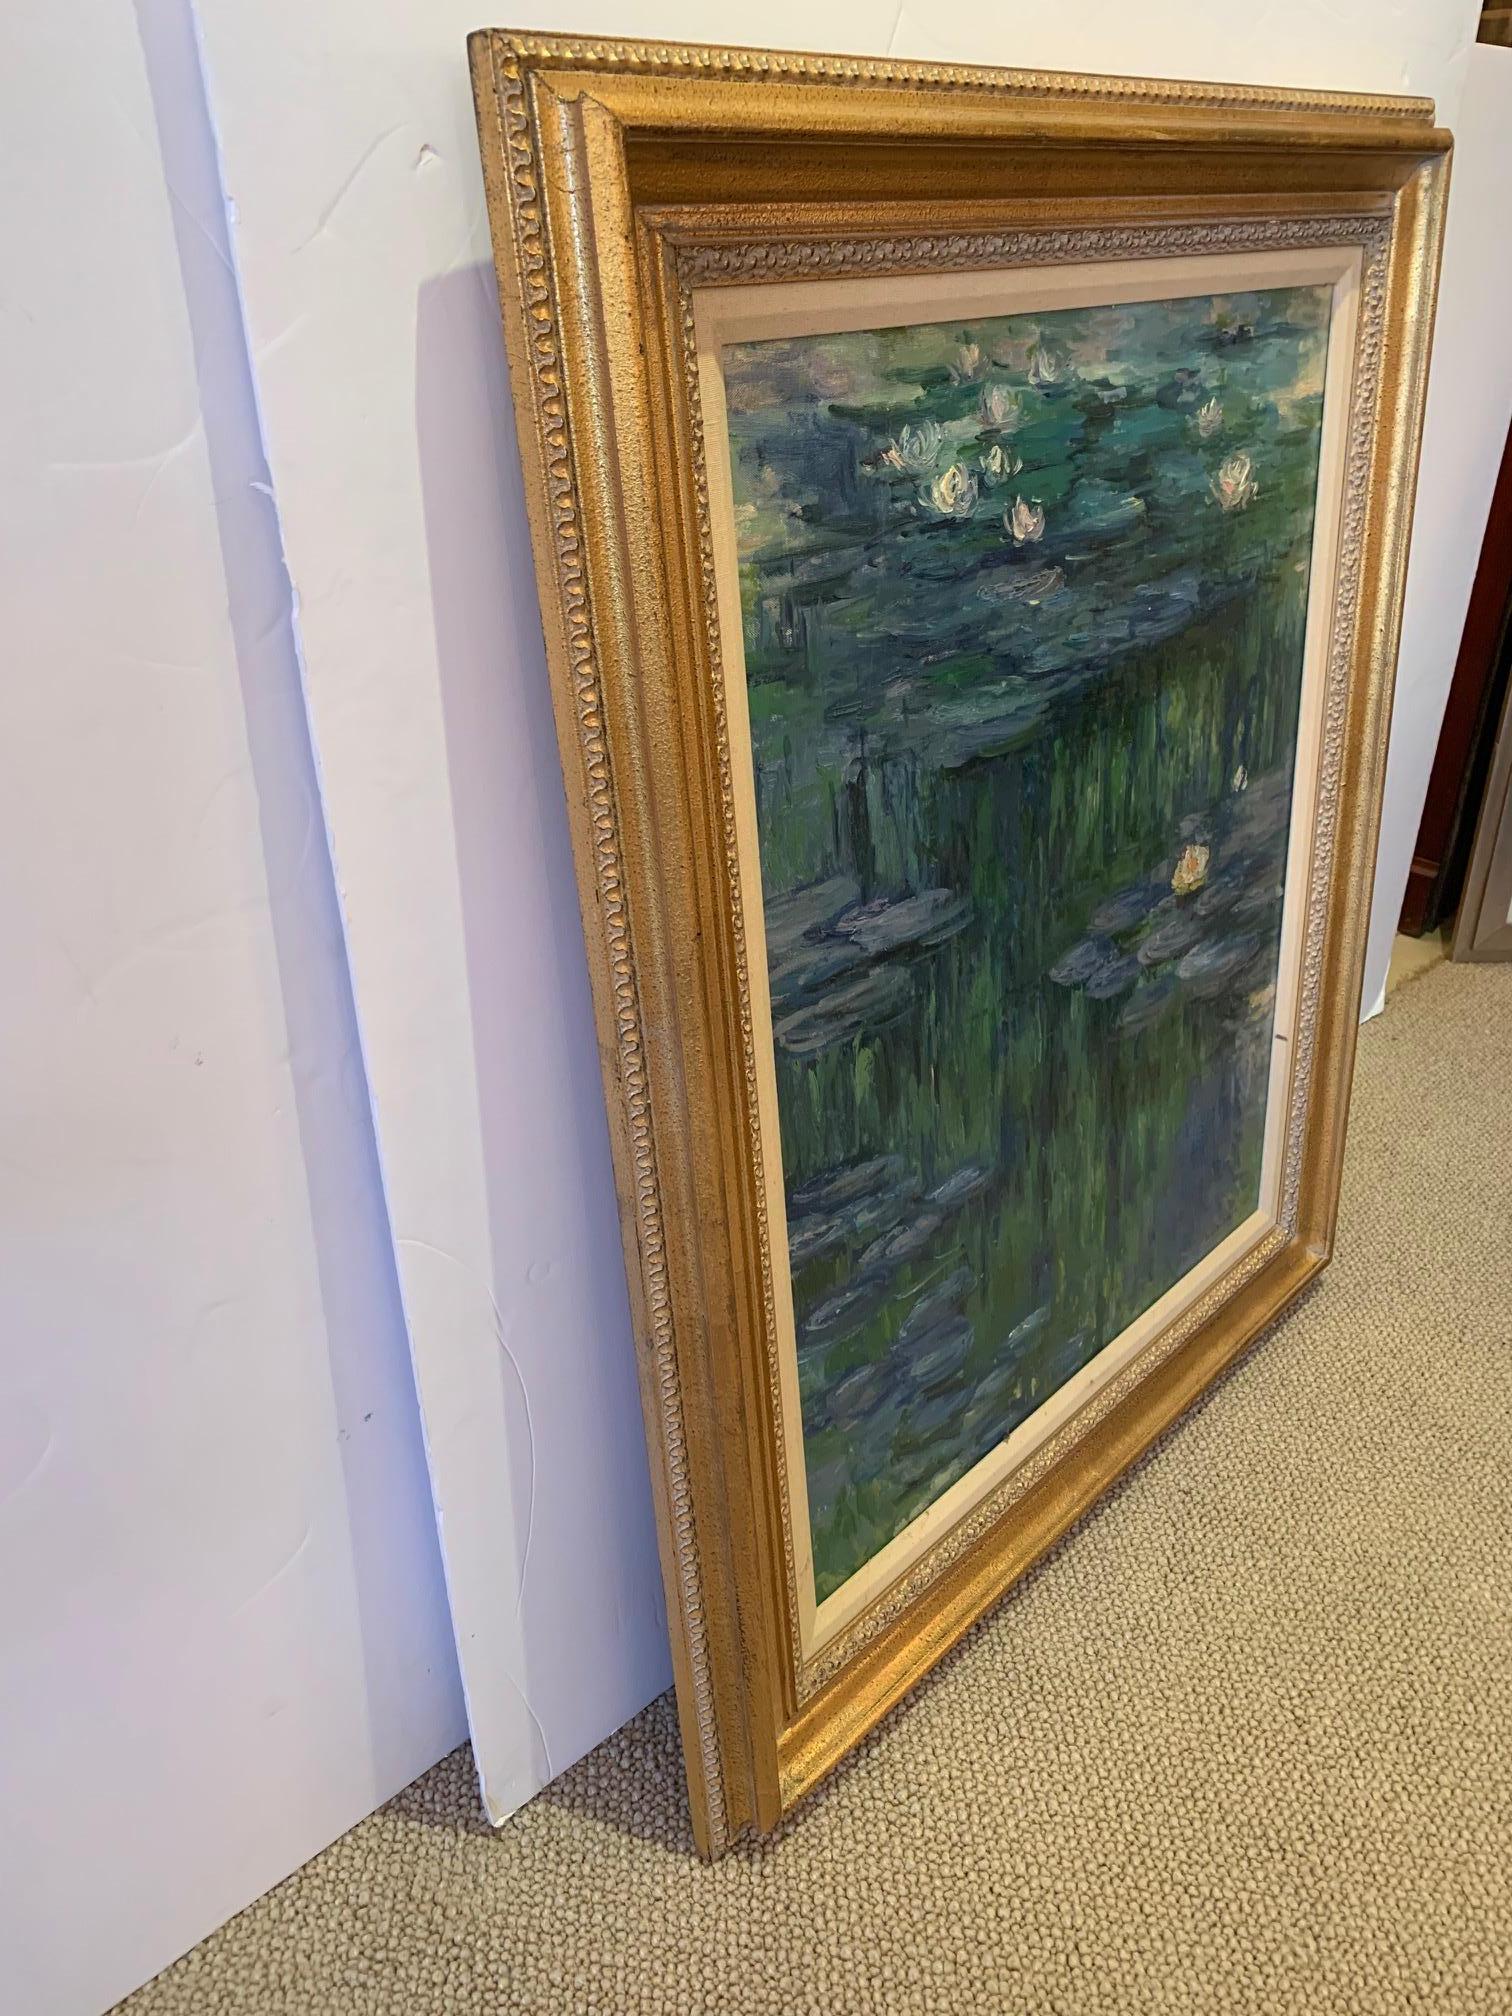 Late 20th Century Superb Lily Pond Landscape Painting in the Style of Monet